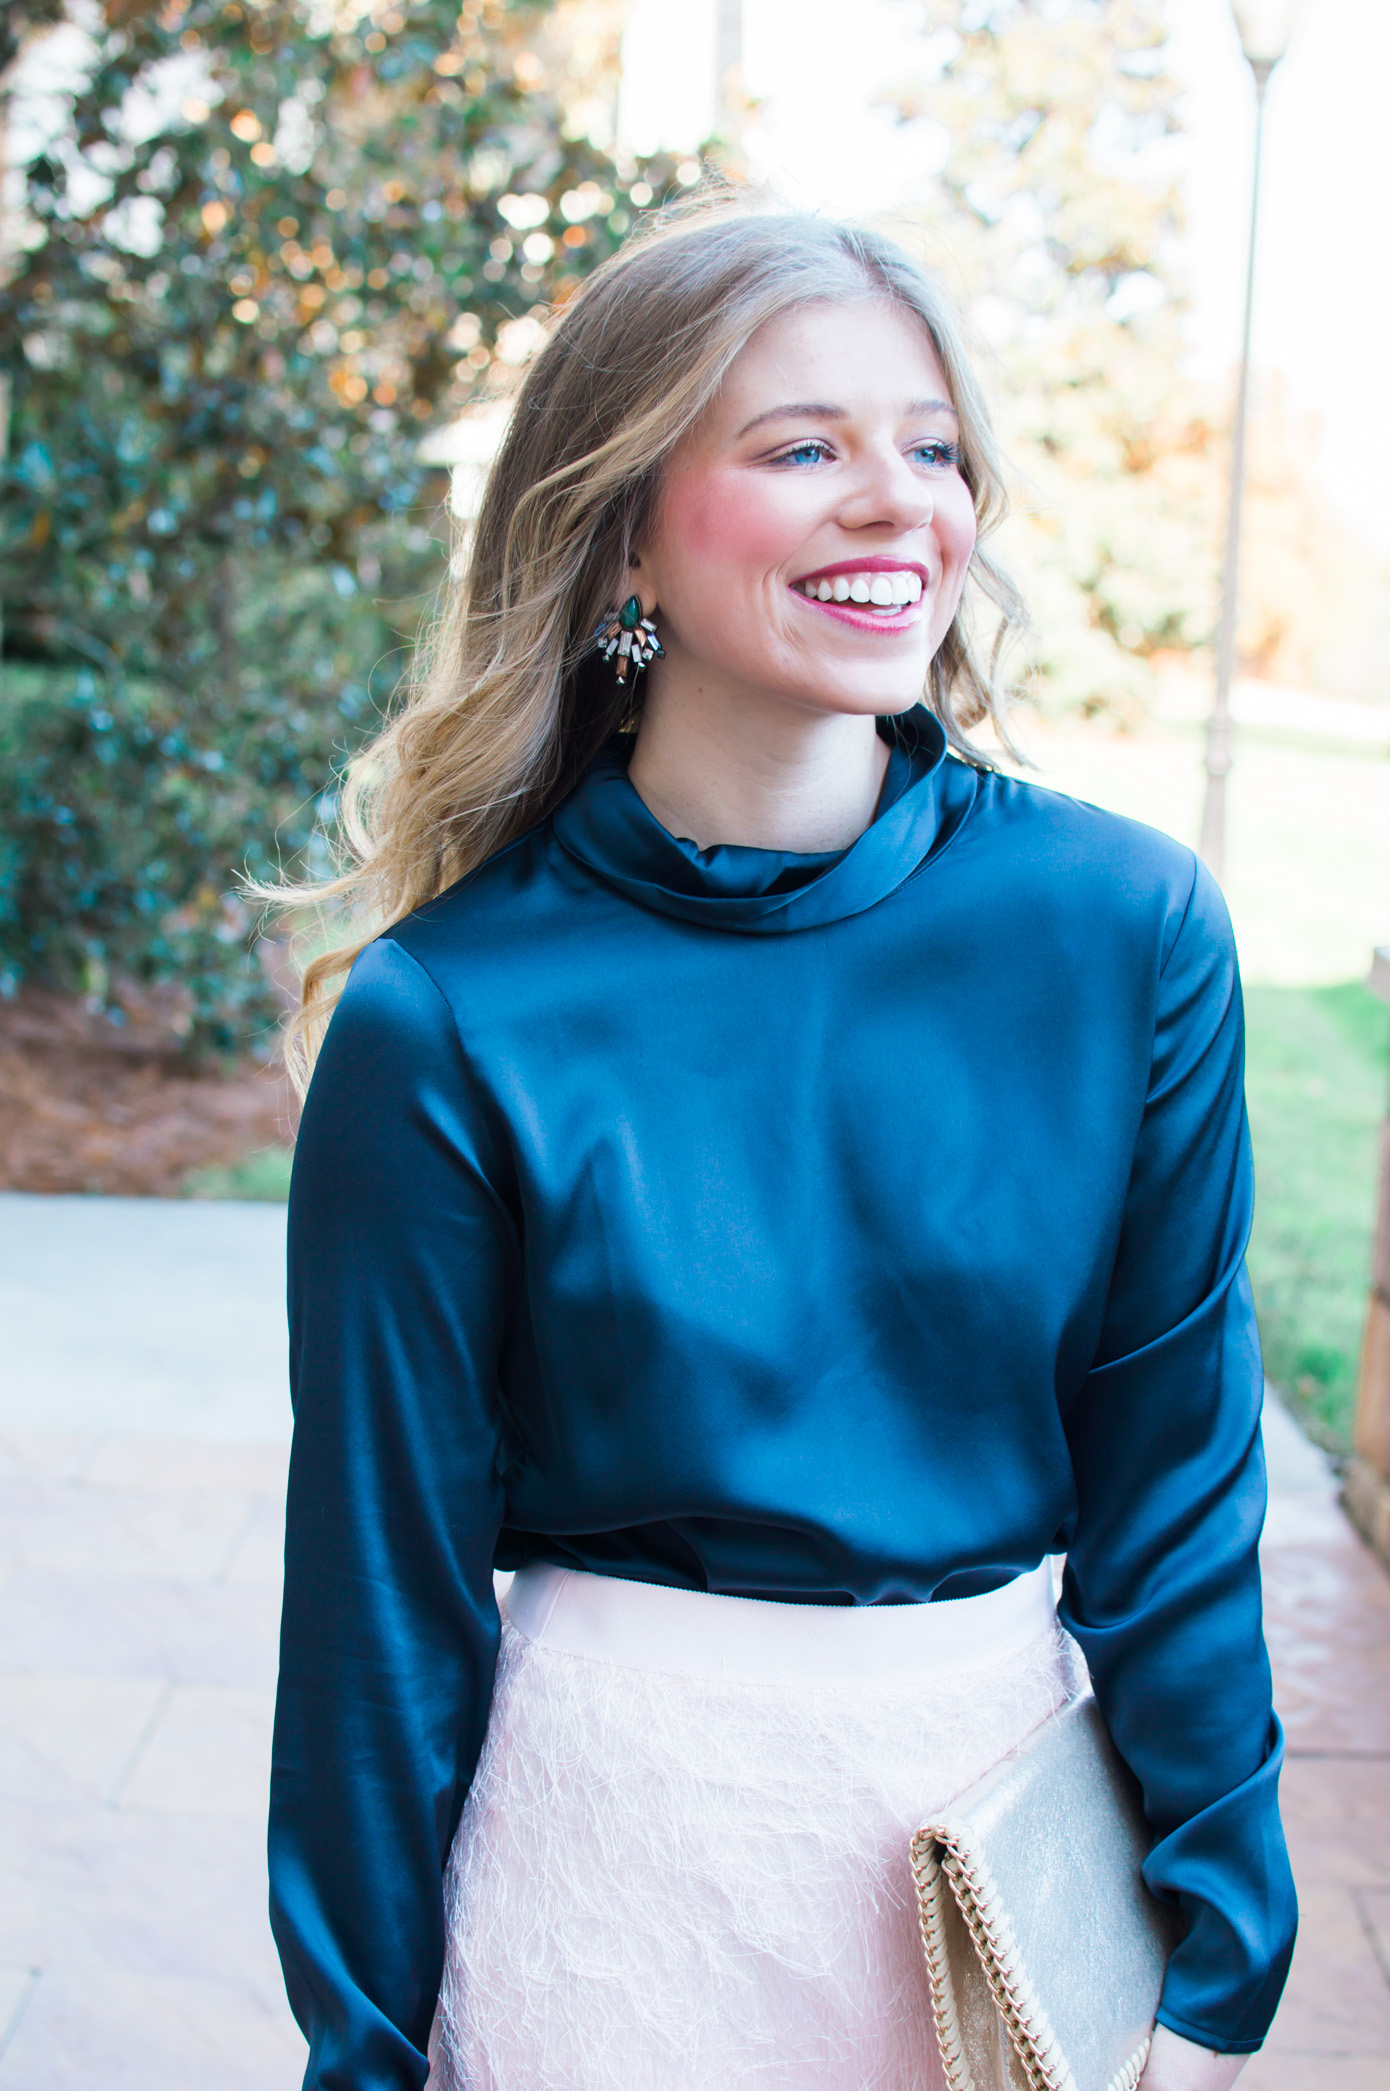 Holiday Fringe Pencil Skirt | Holiday Party Outfit Idea | Louella Reese Life & Style Blog